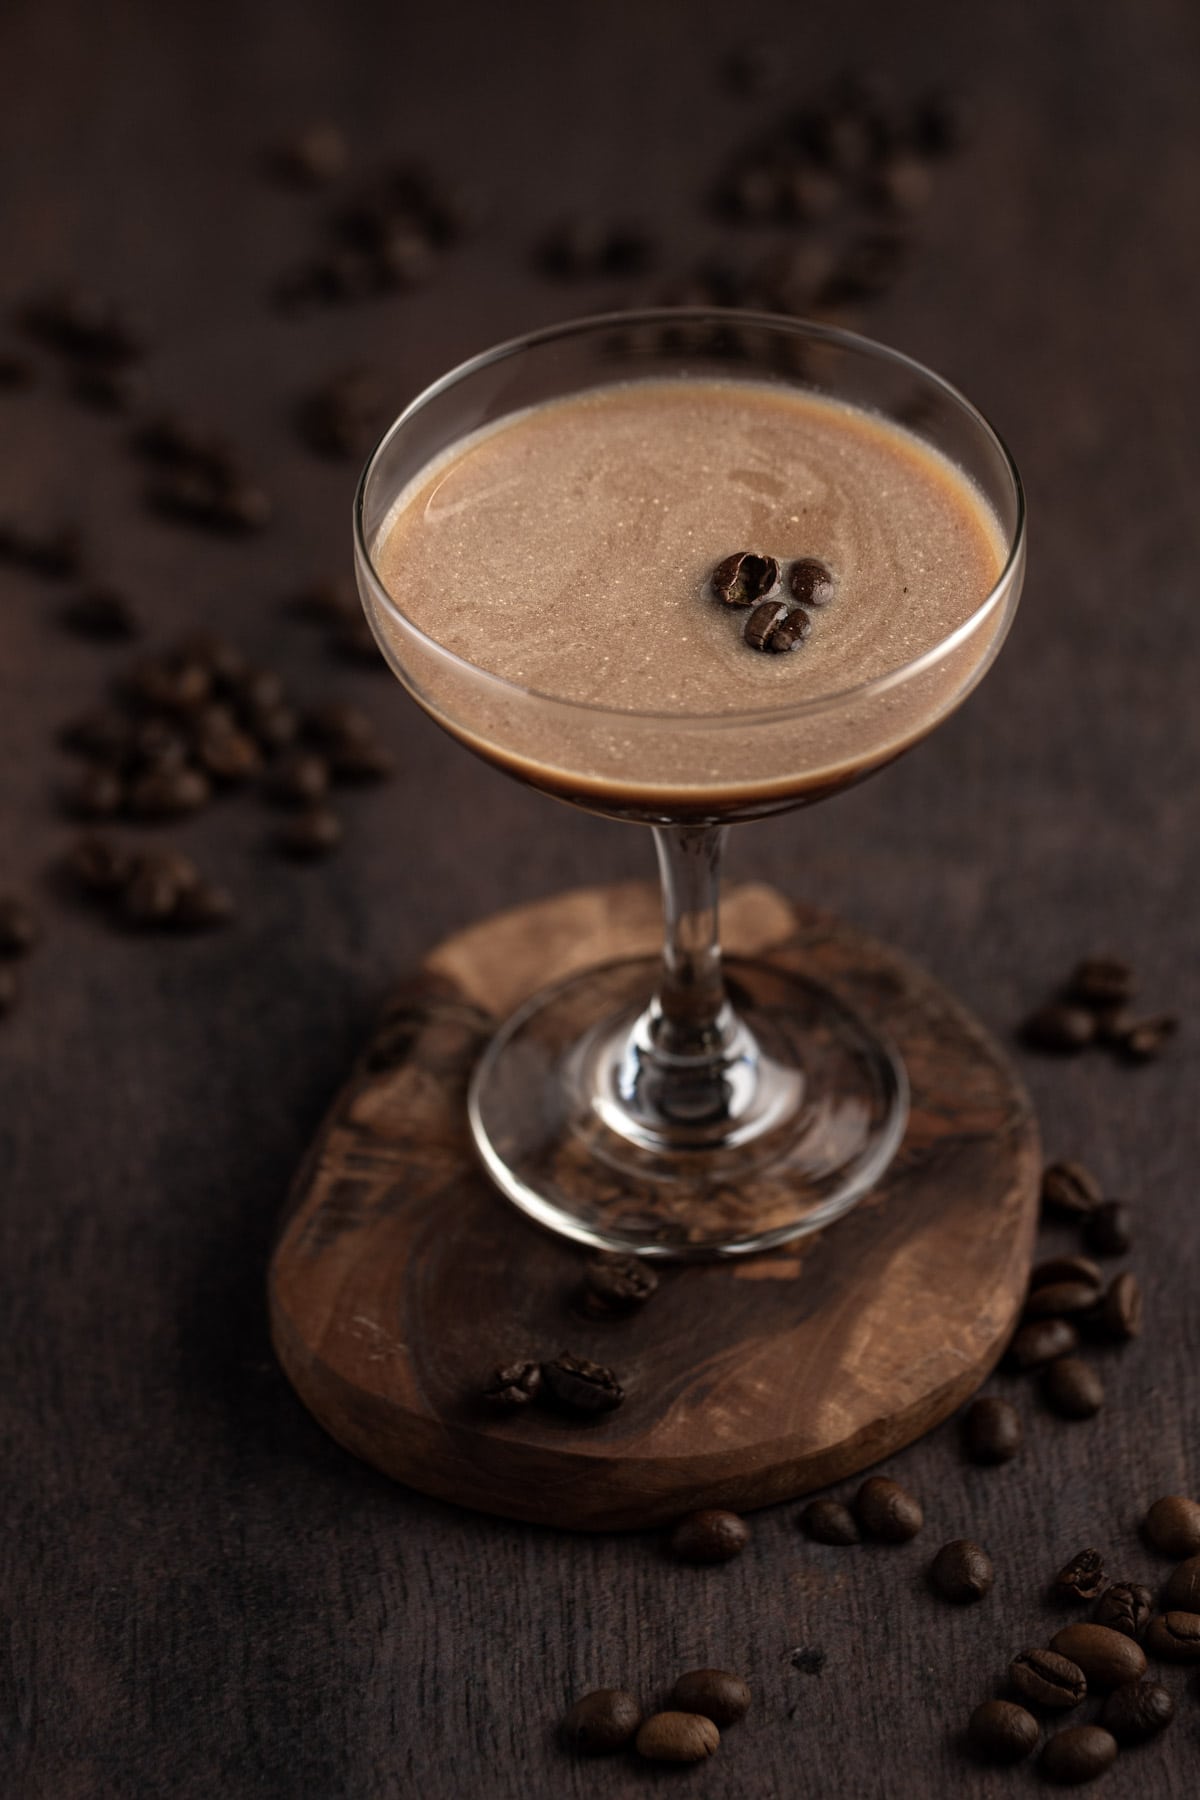 A baileys espresso martini in a coupe glass, garnished with coffee beans, on a wooden table.